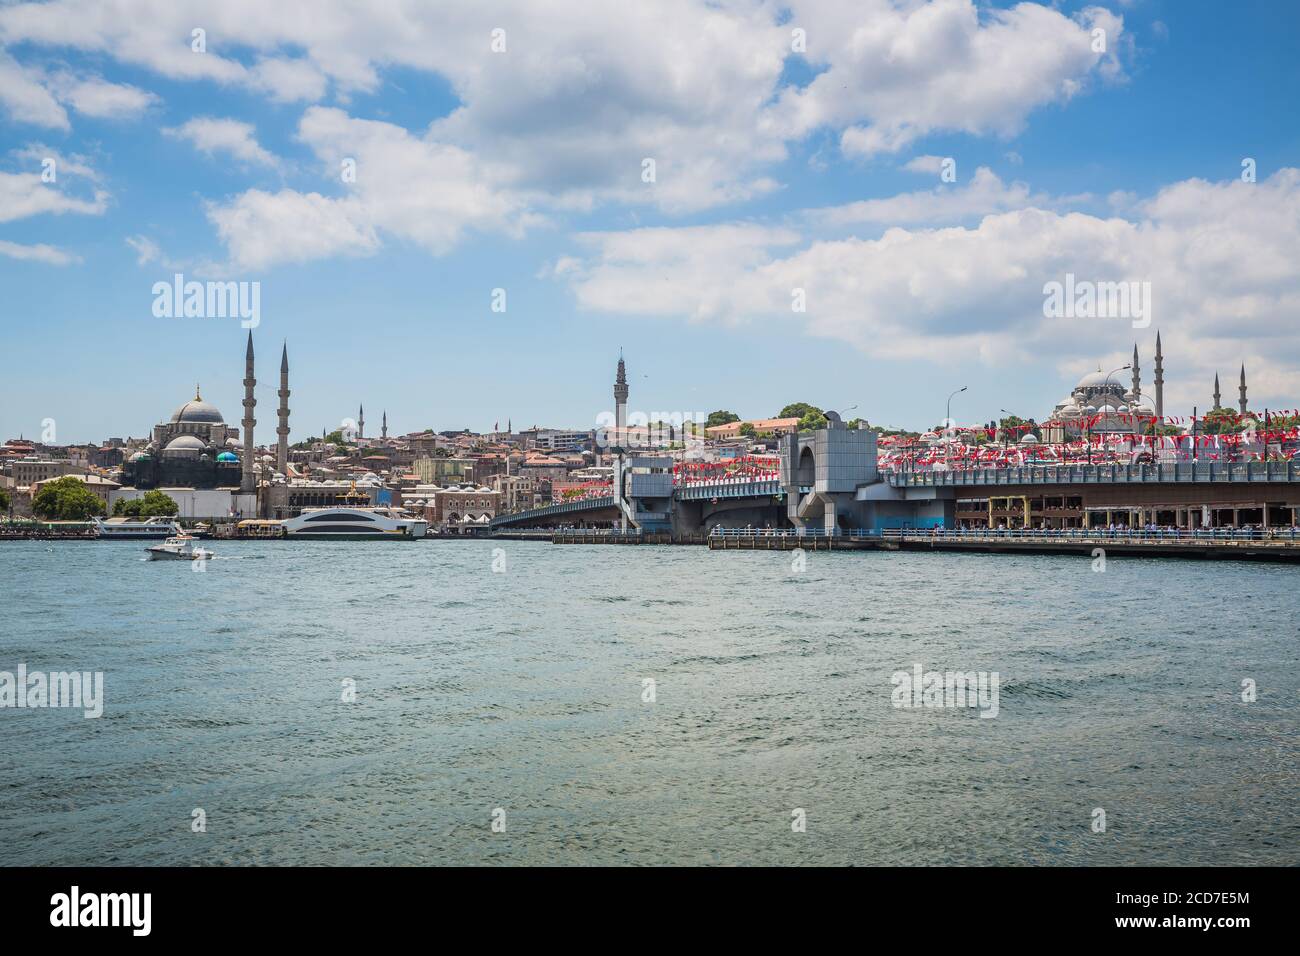 The old town of Istanbul showing the Golden Horn Bridge (Halic koprusu), The Yeni Mosque, Spice (Egyptian) Bazaar, The Beyazit Tower, the Suleymaniye Stock Photo